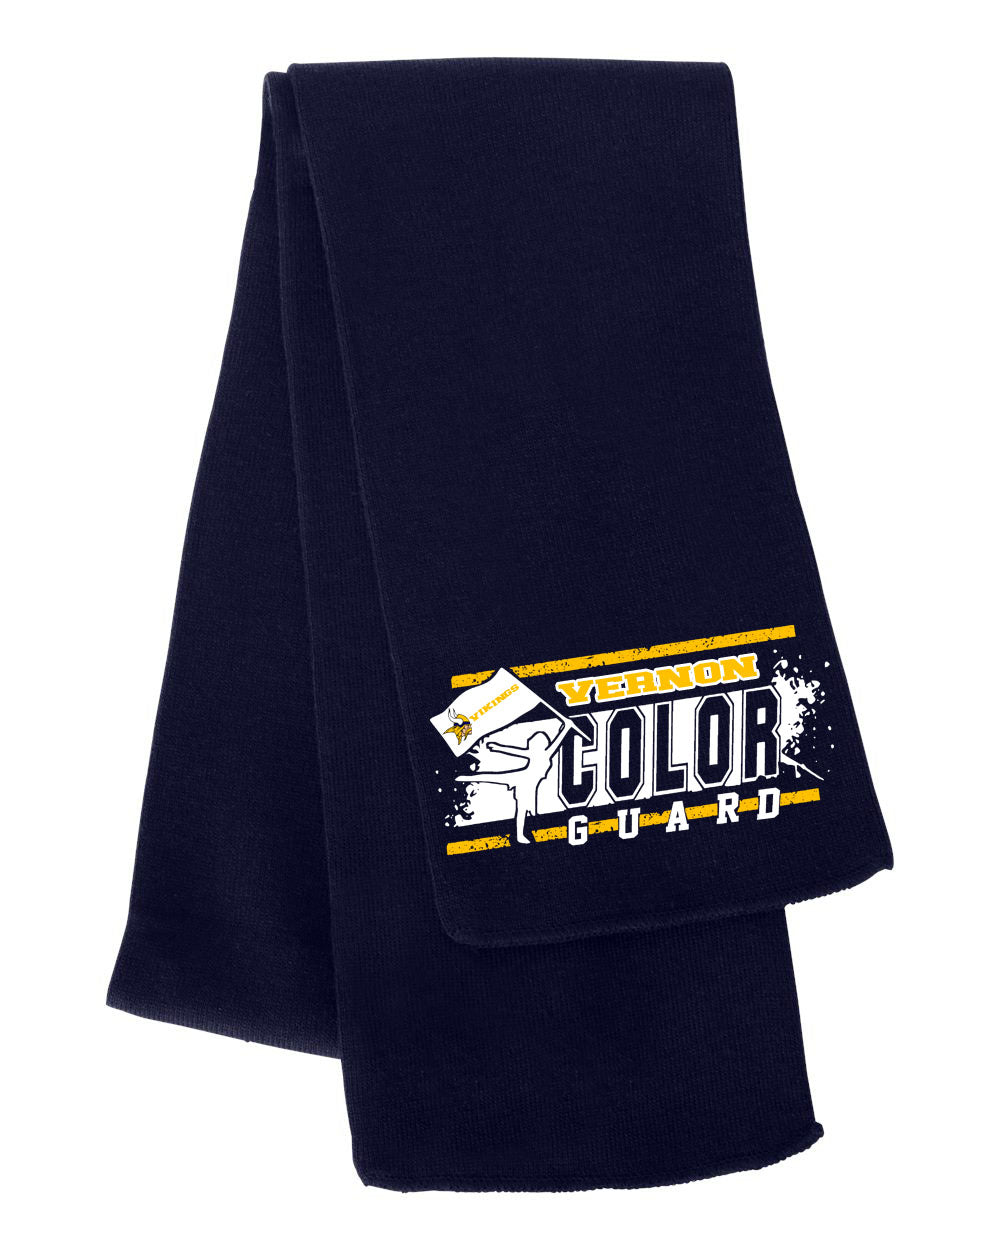 Vernon Marching Band design 4 Scarf